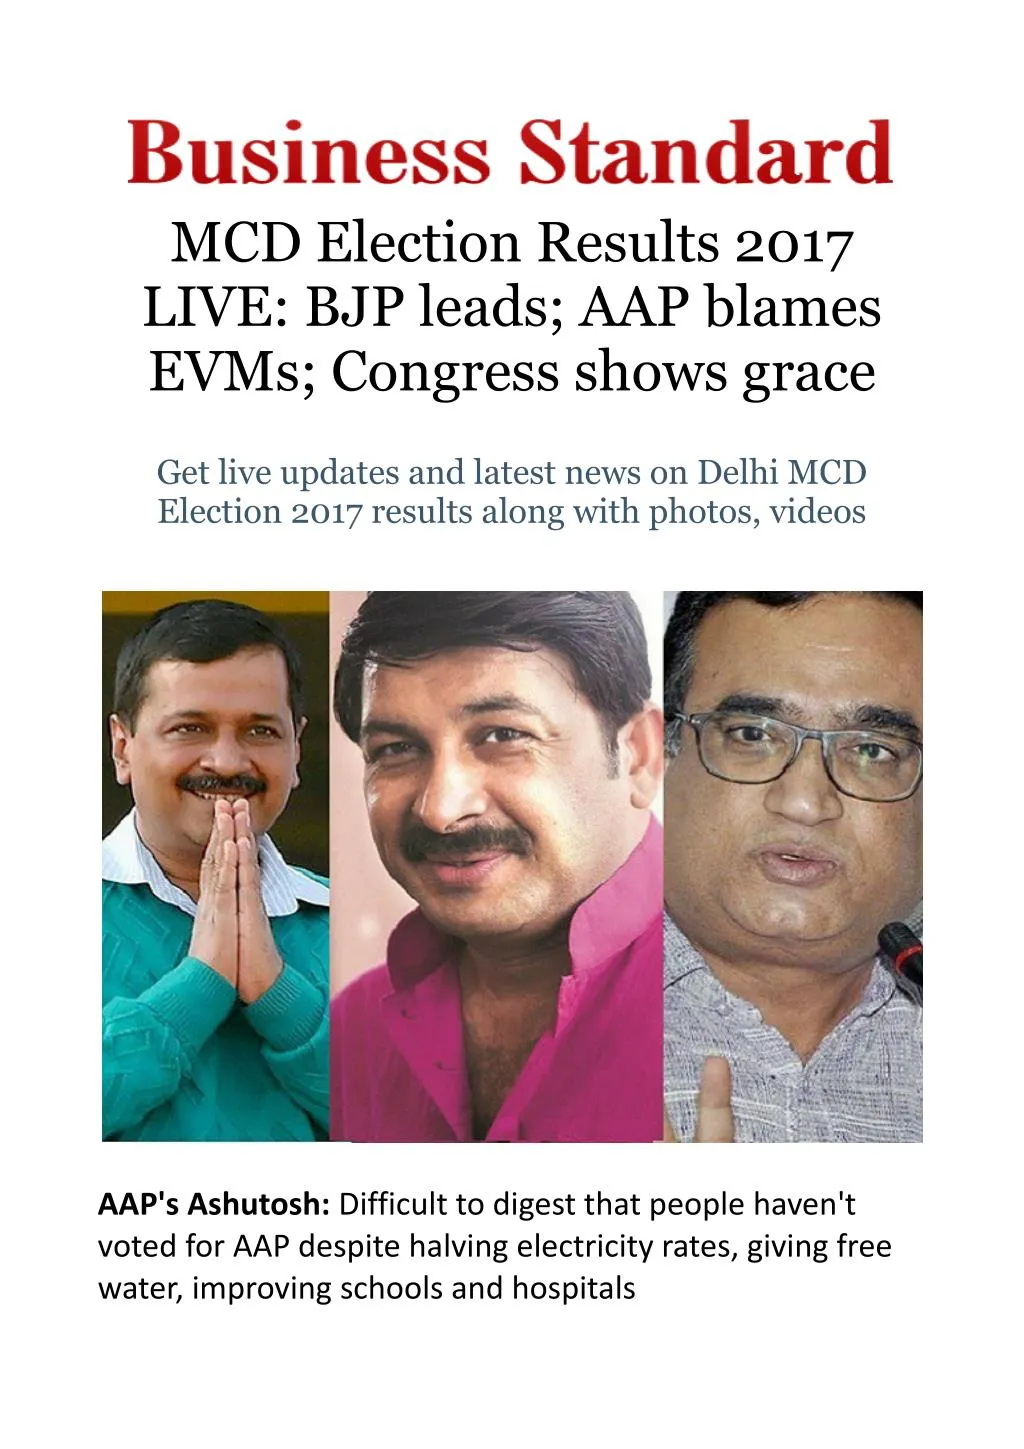 mcd election results 2017 live bjp leads